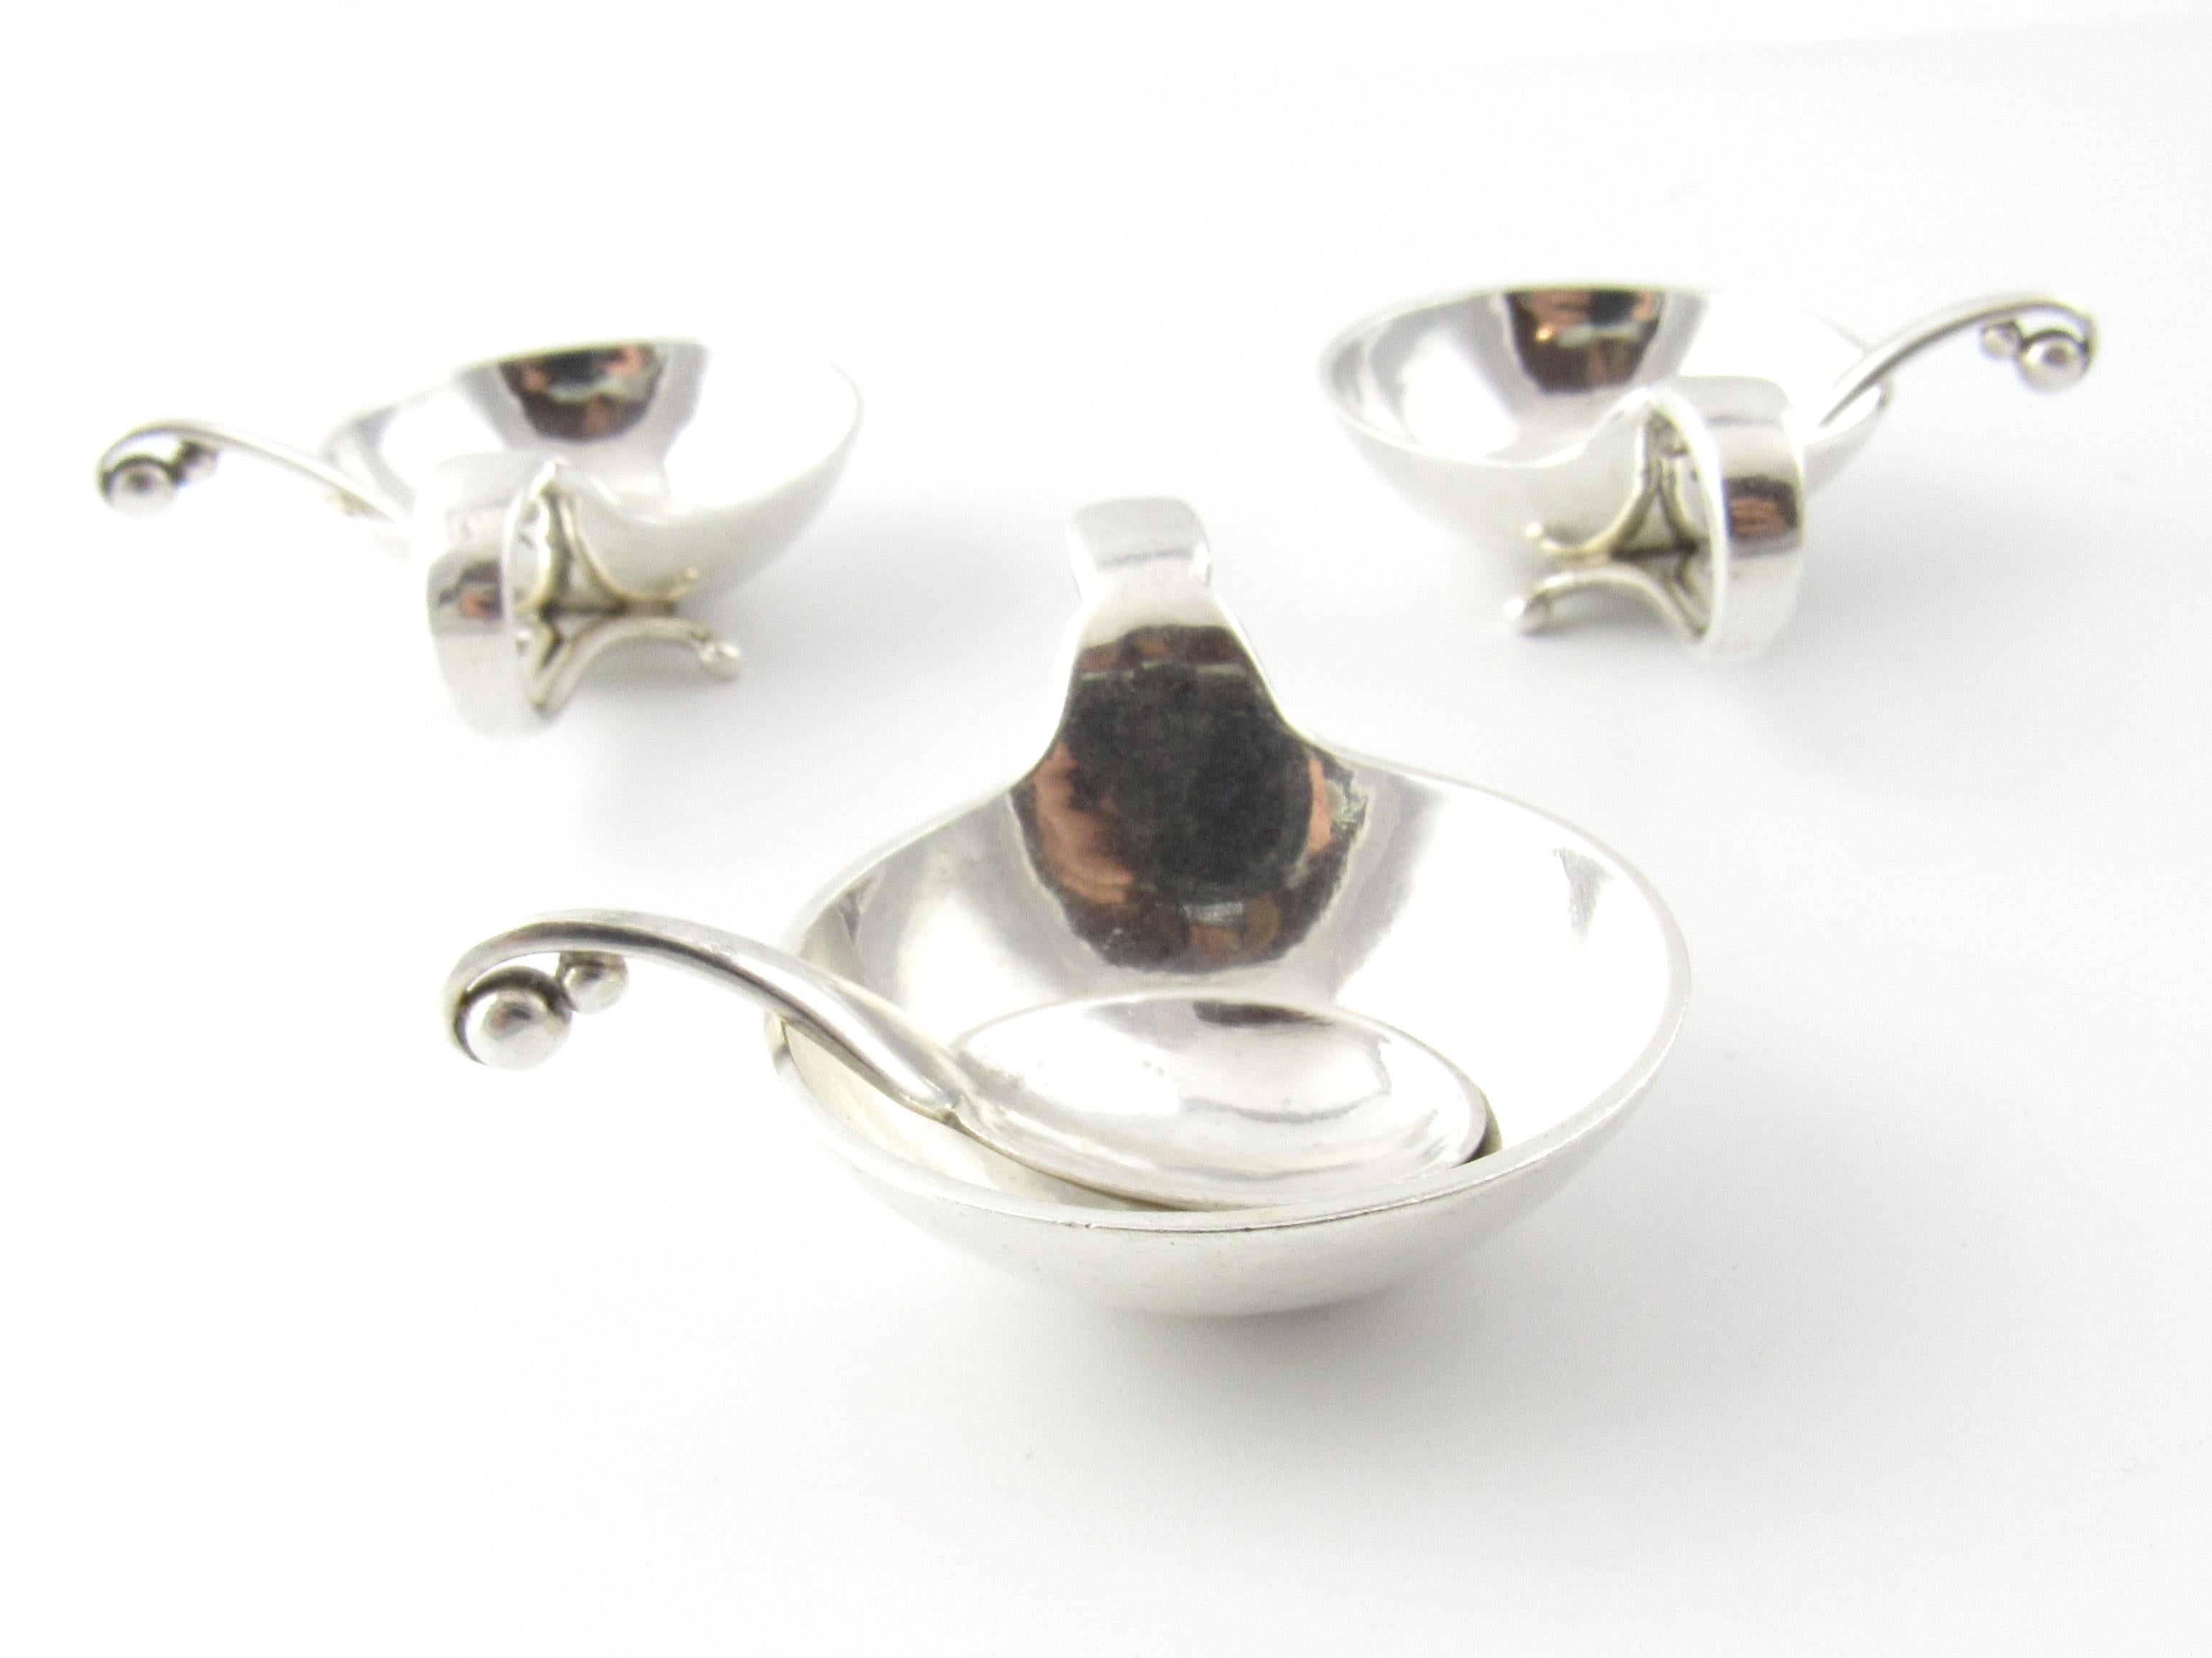 Women's or Men's 3 George Jensen Sterling Silver Salt Cellars and Matching Spoons #110